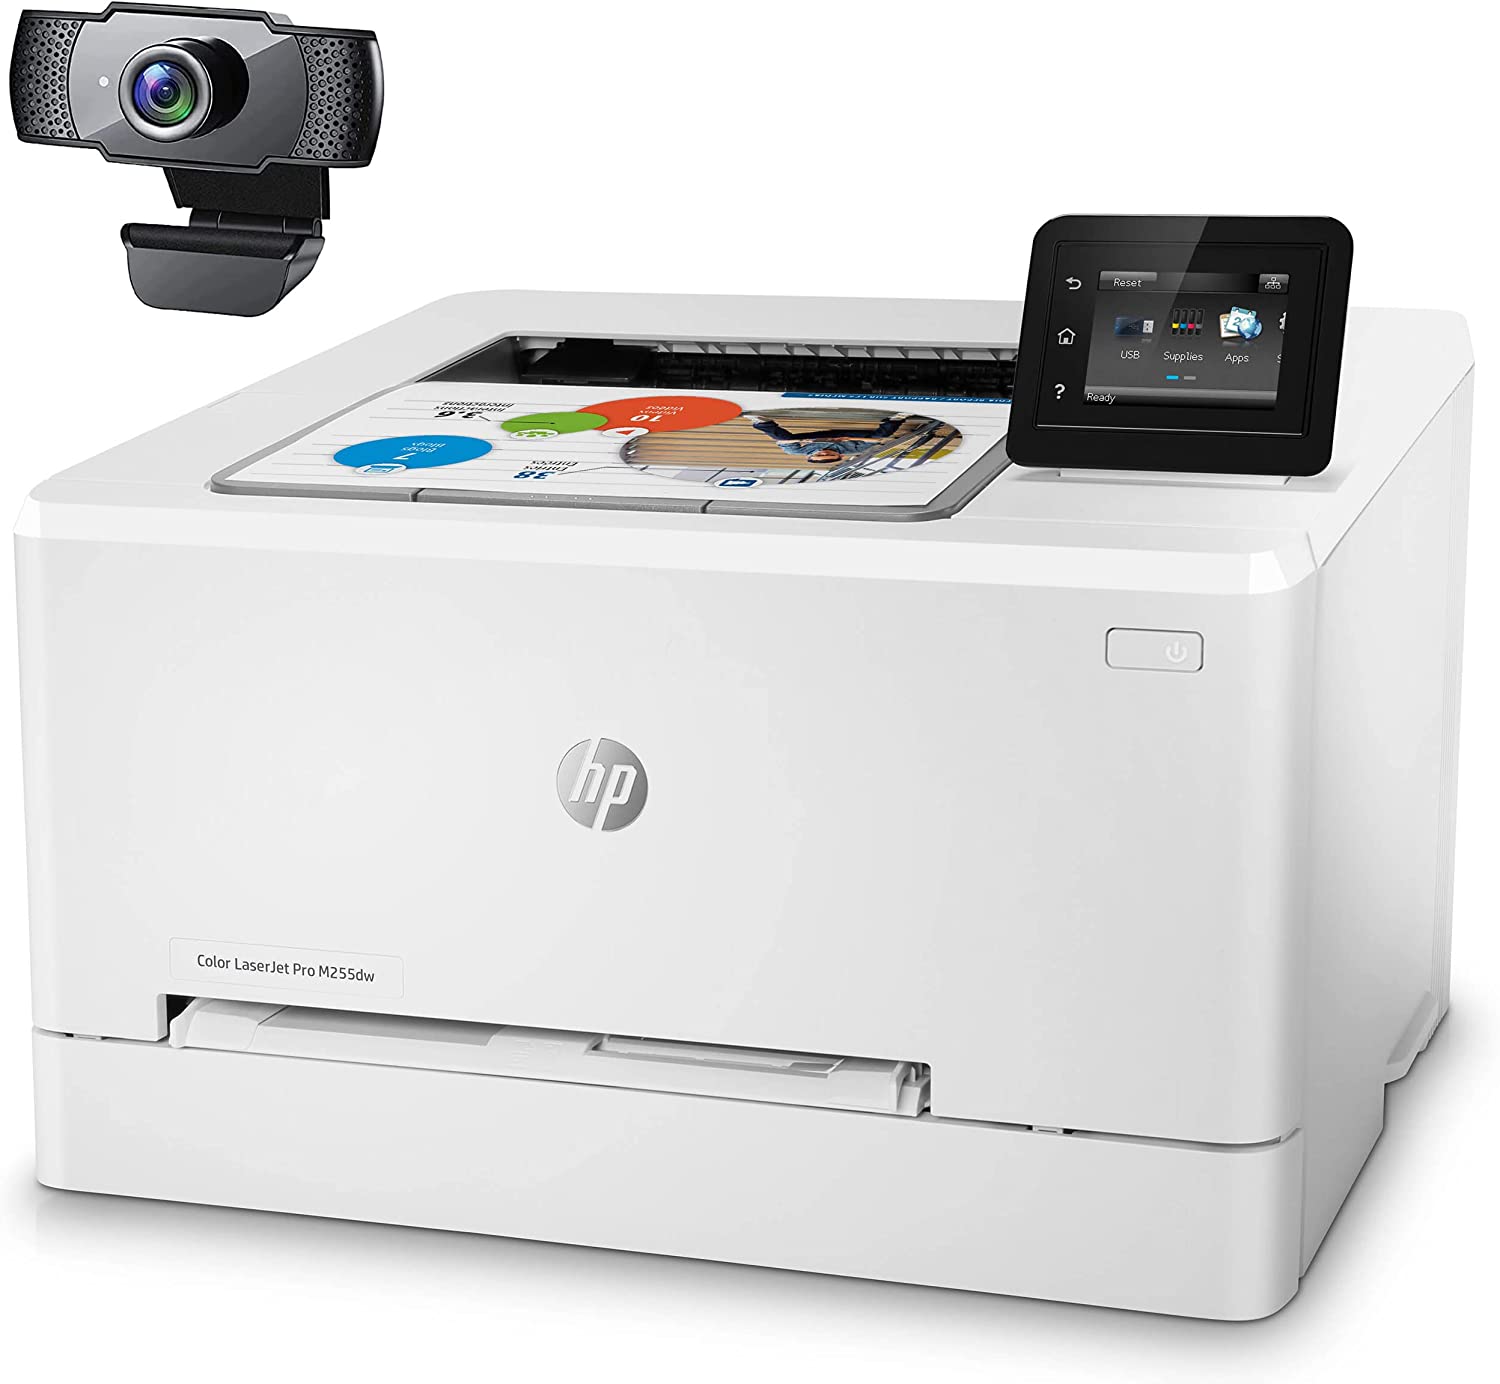 best sublimation printer on a budget